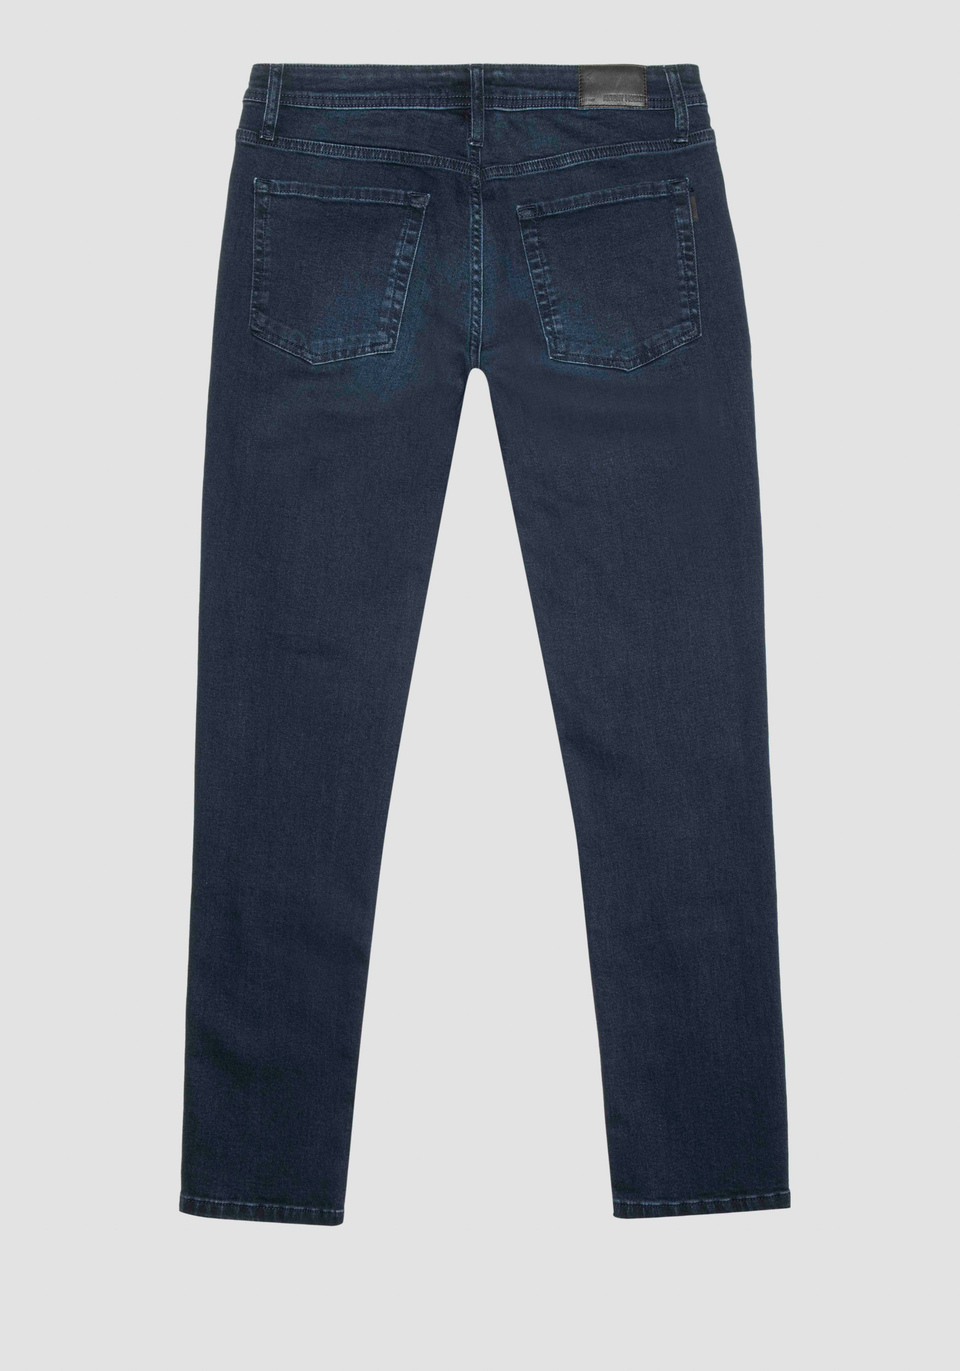 JEANS TAPERED FIT “OZZY” IN DENIM BLU SCURO ICONIC BASIC - Antony Morato Online Shop